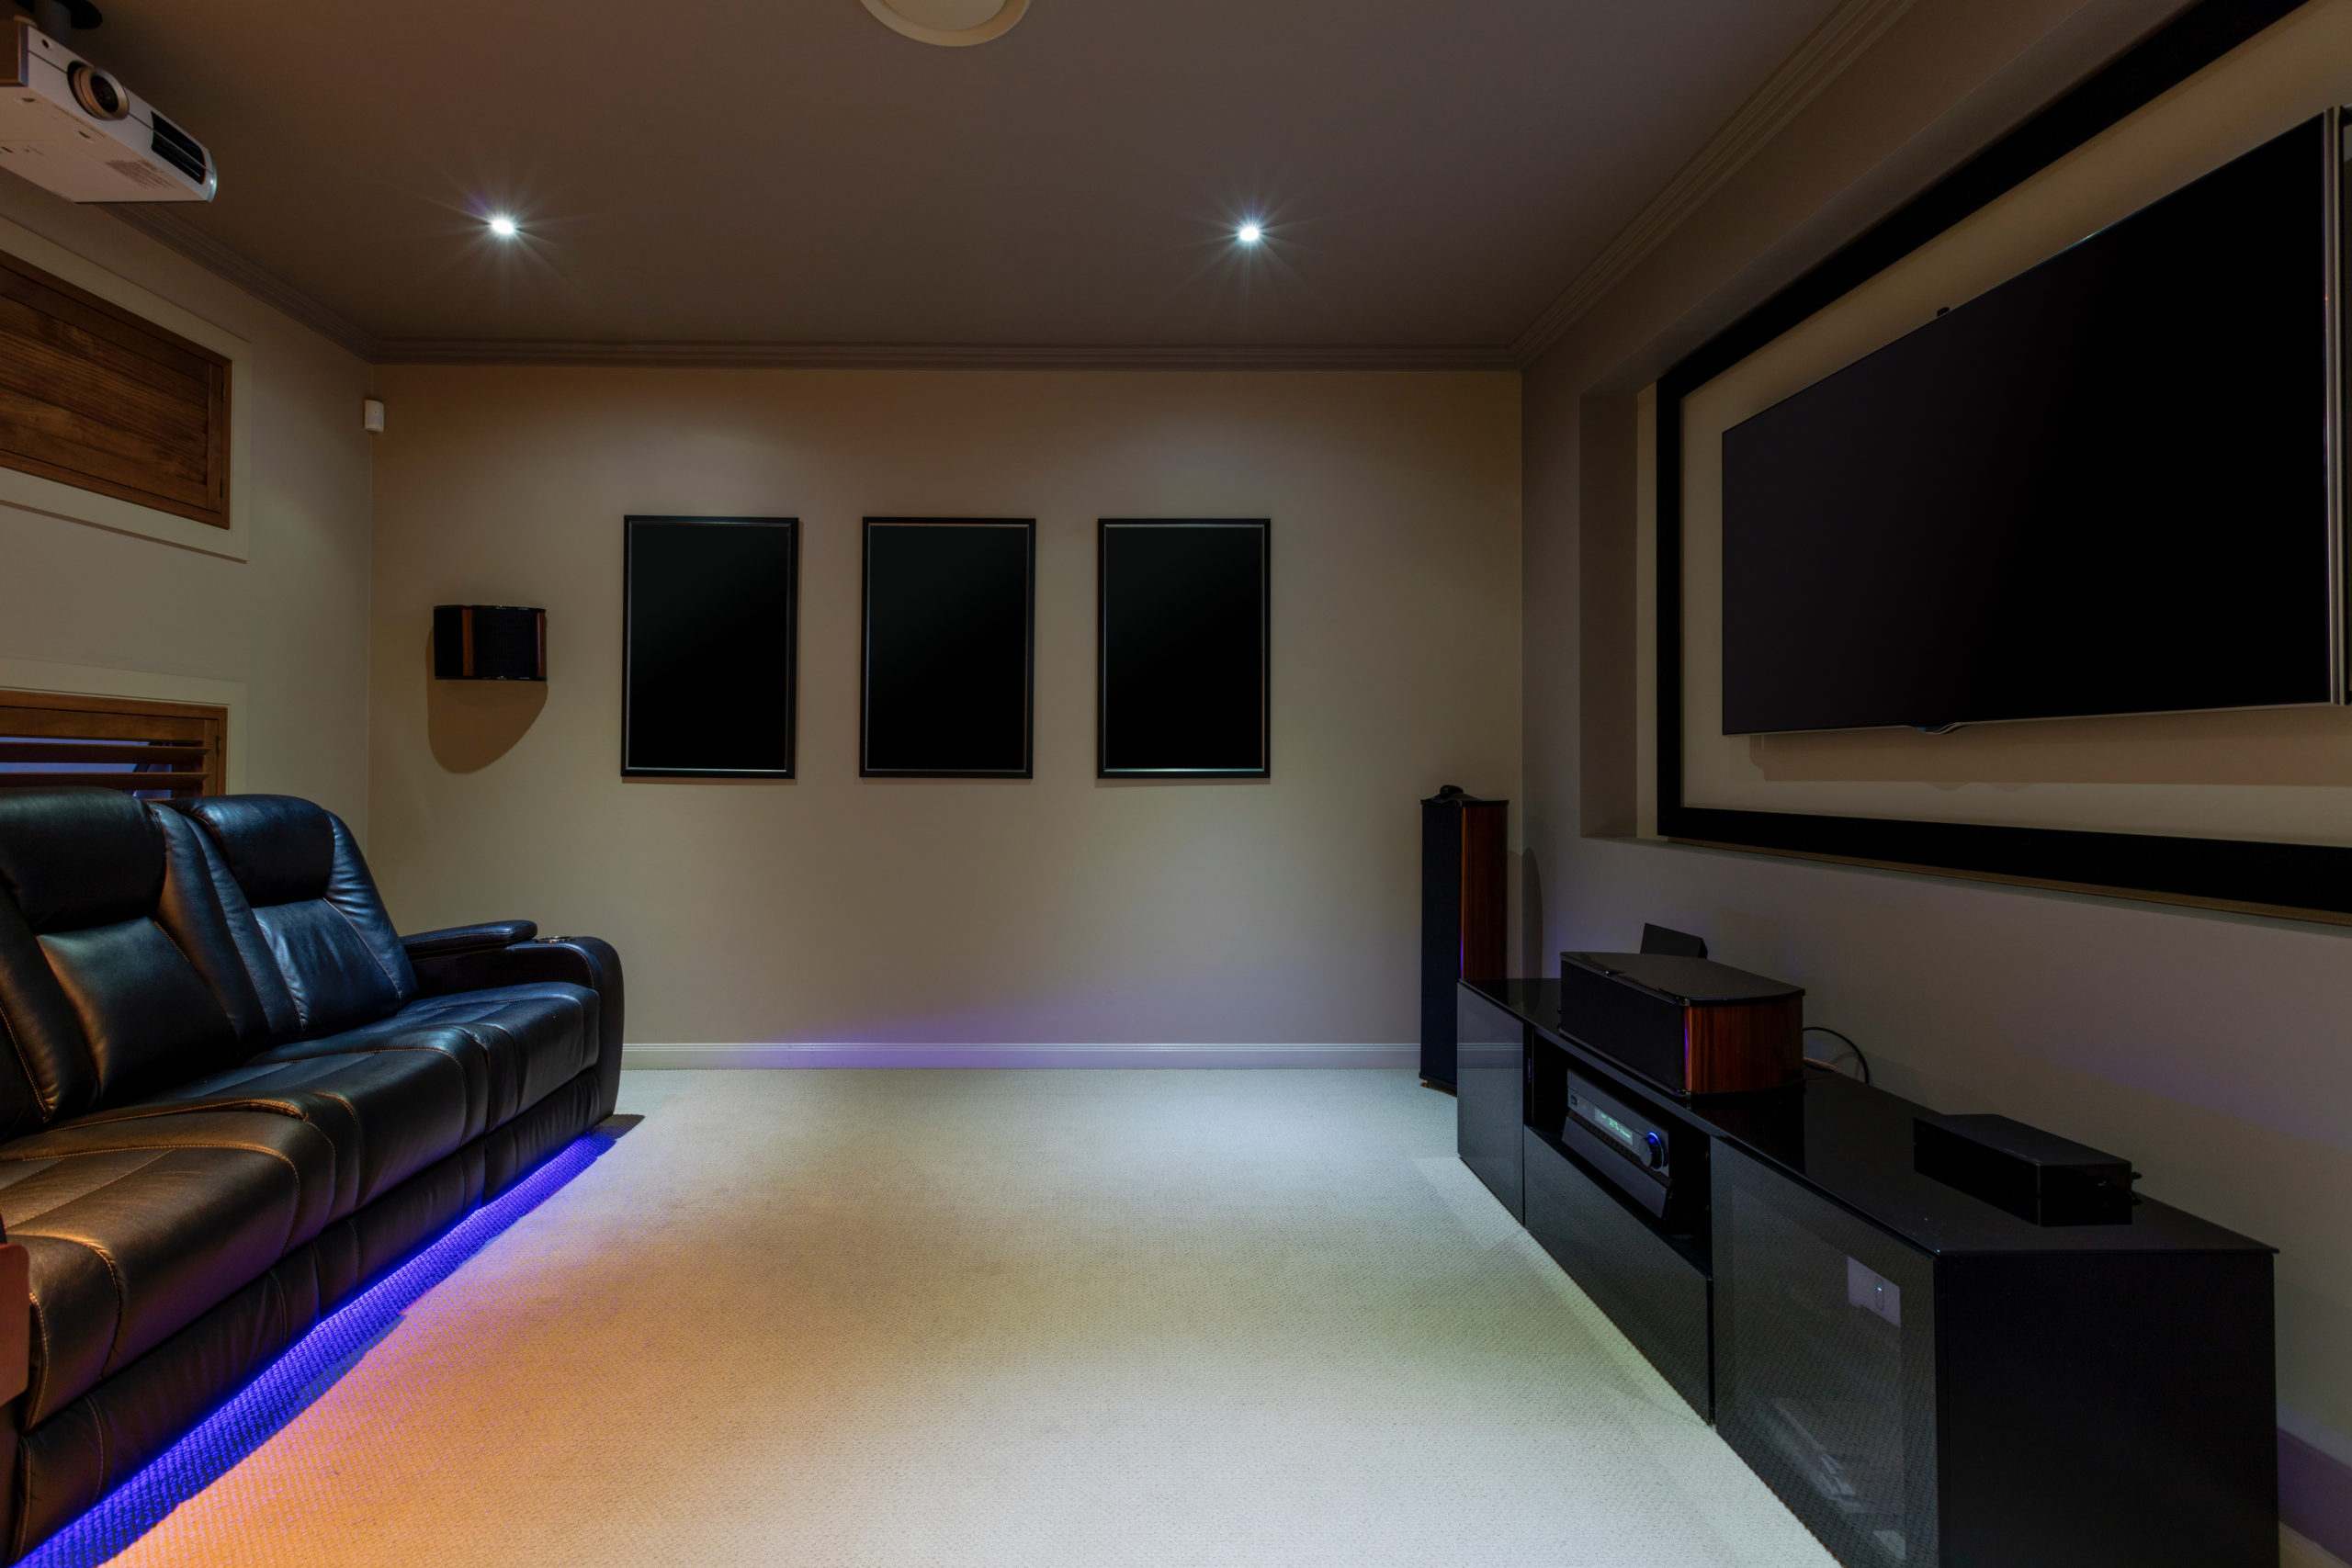 Tips and tricks for Soundproofing Your Home Theater